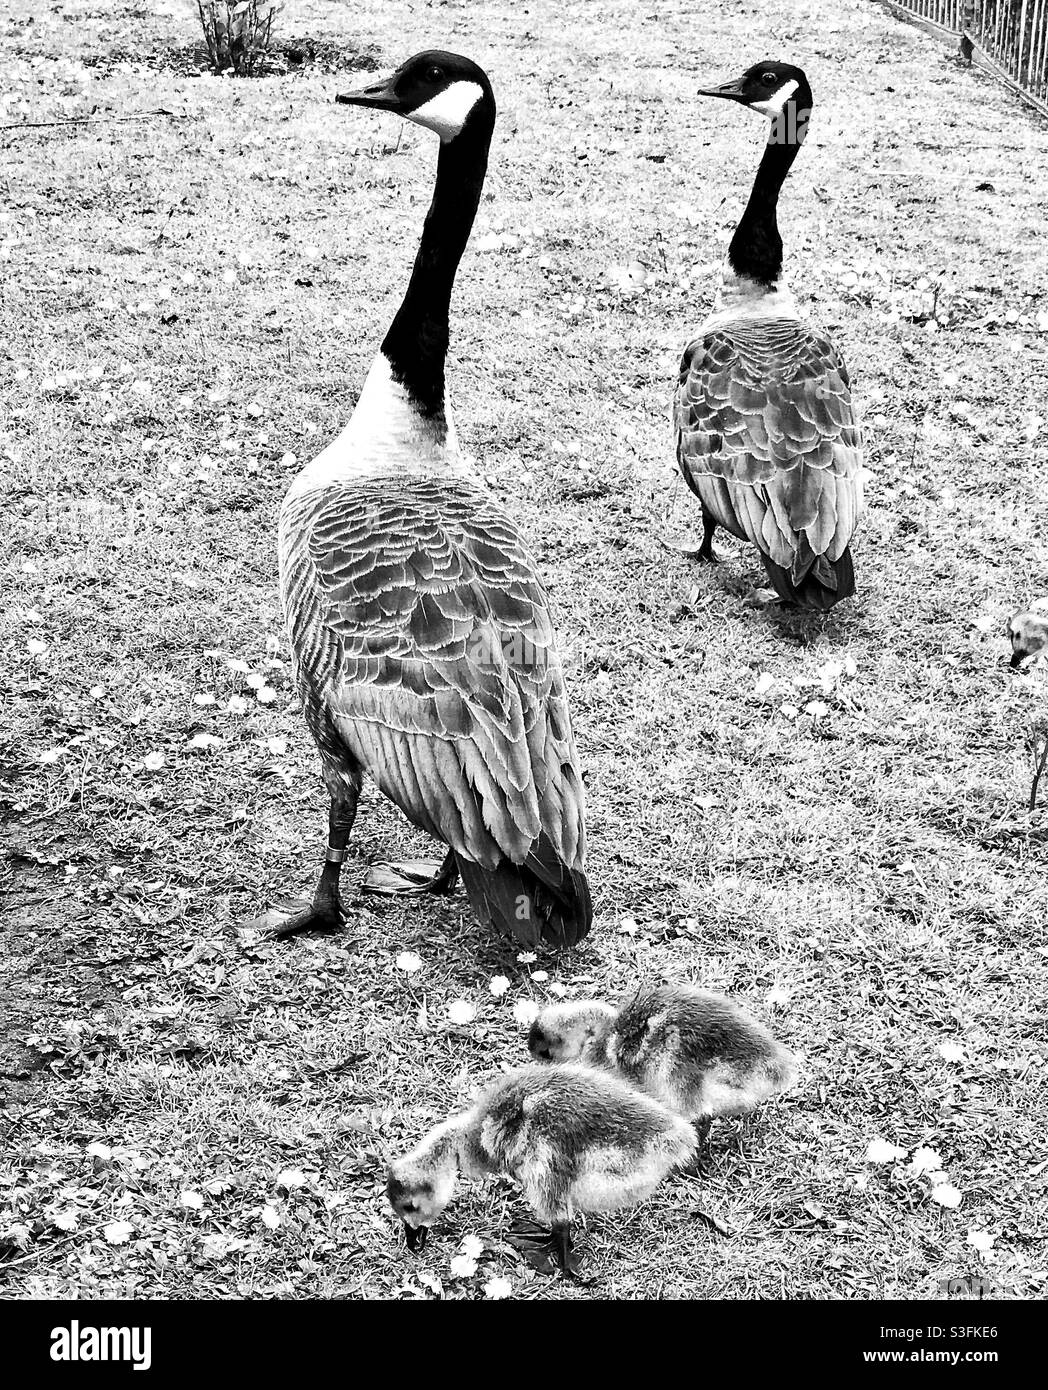 Geese london Black and White Stock Photos & Images - Alamy